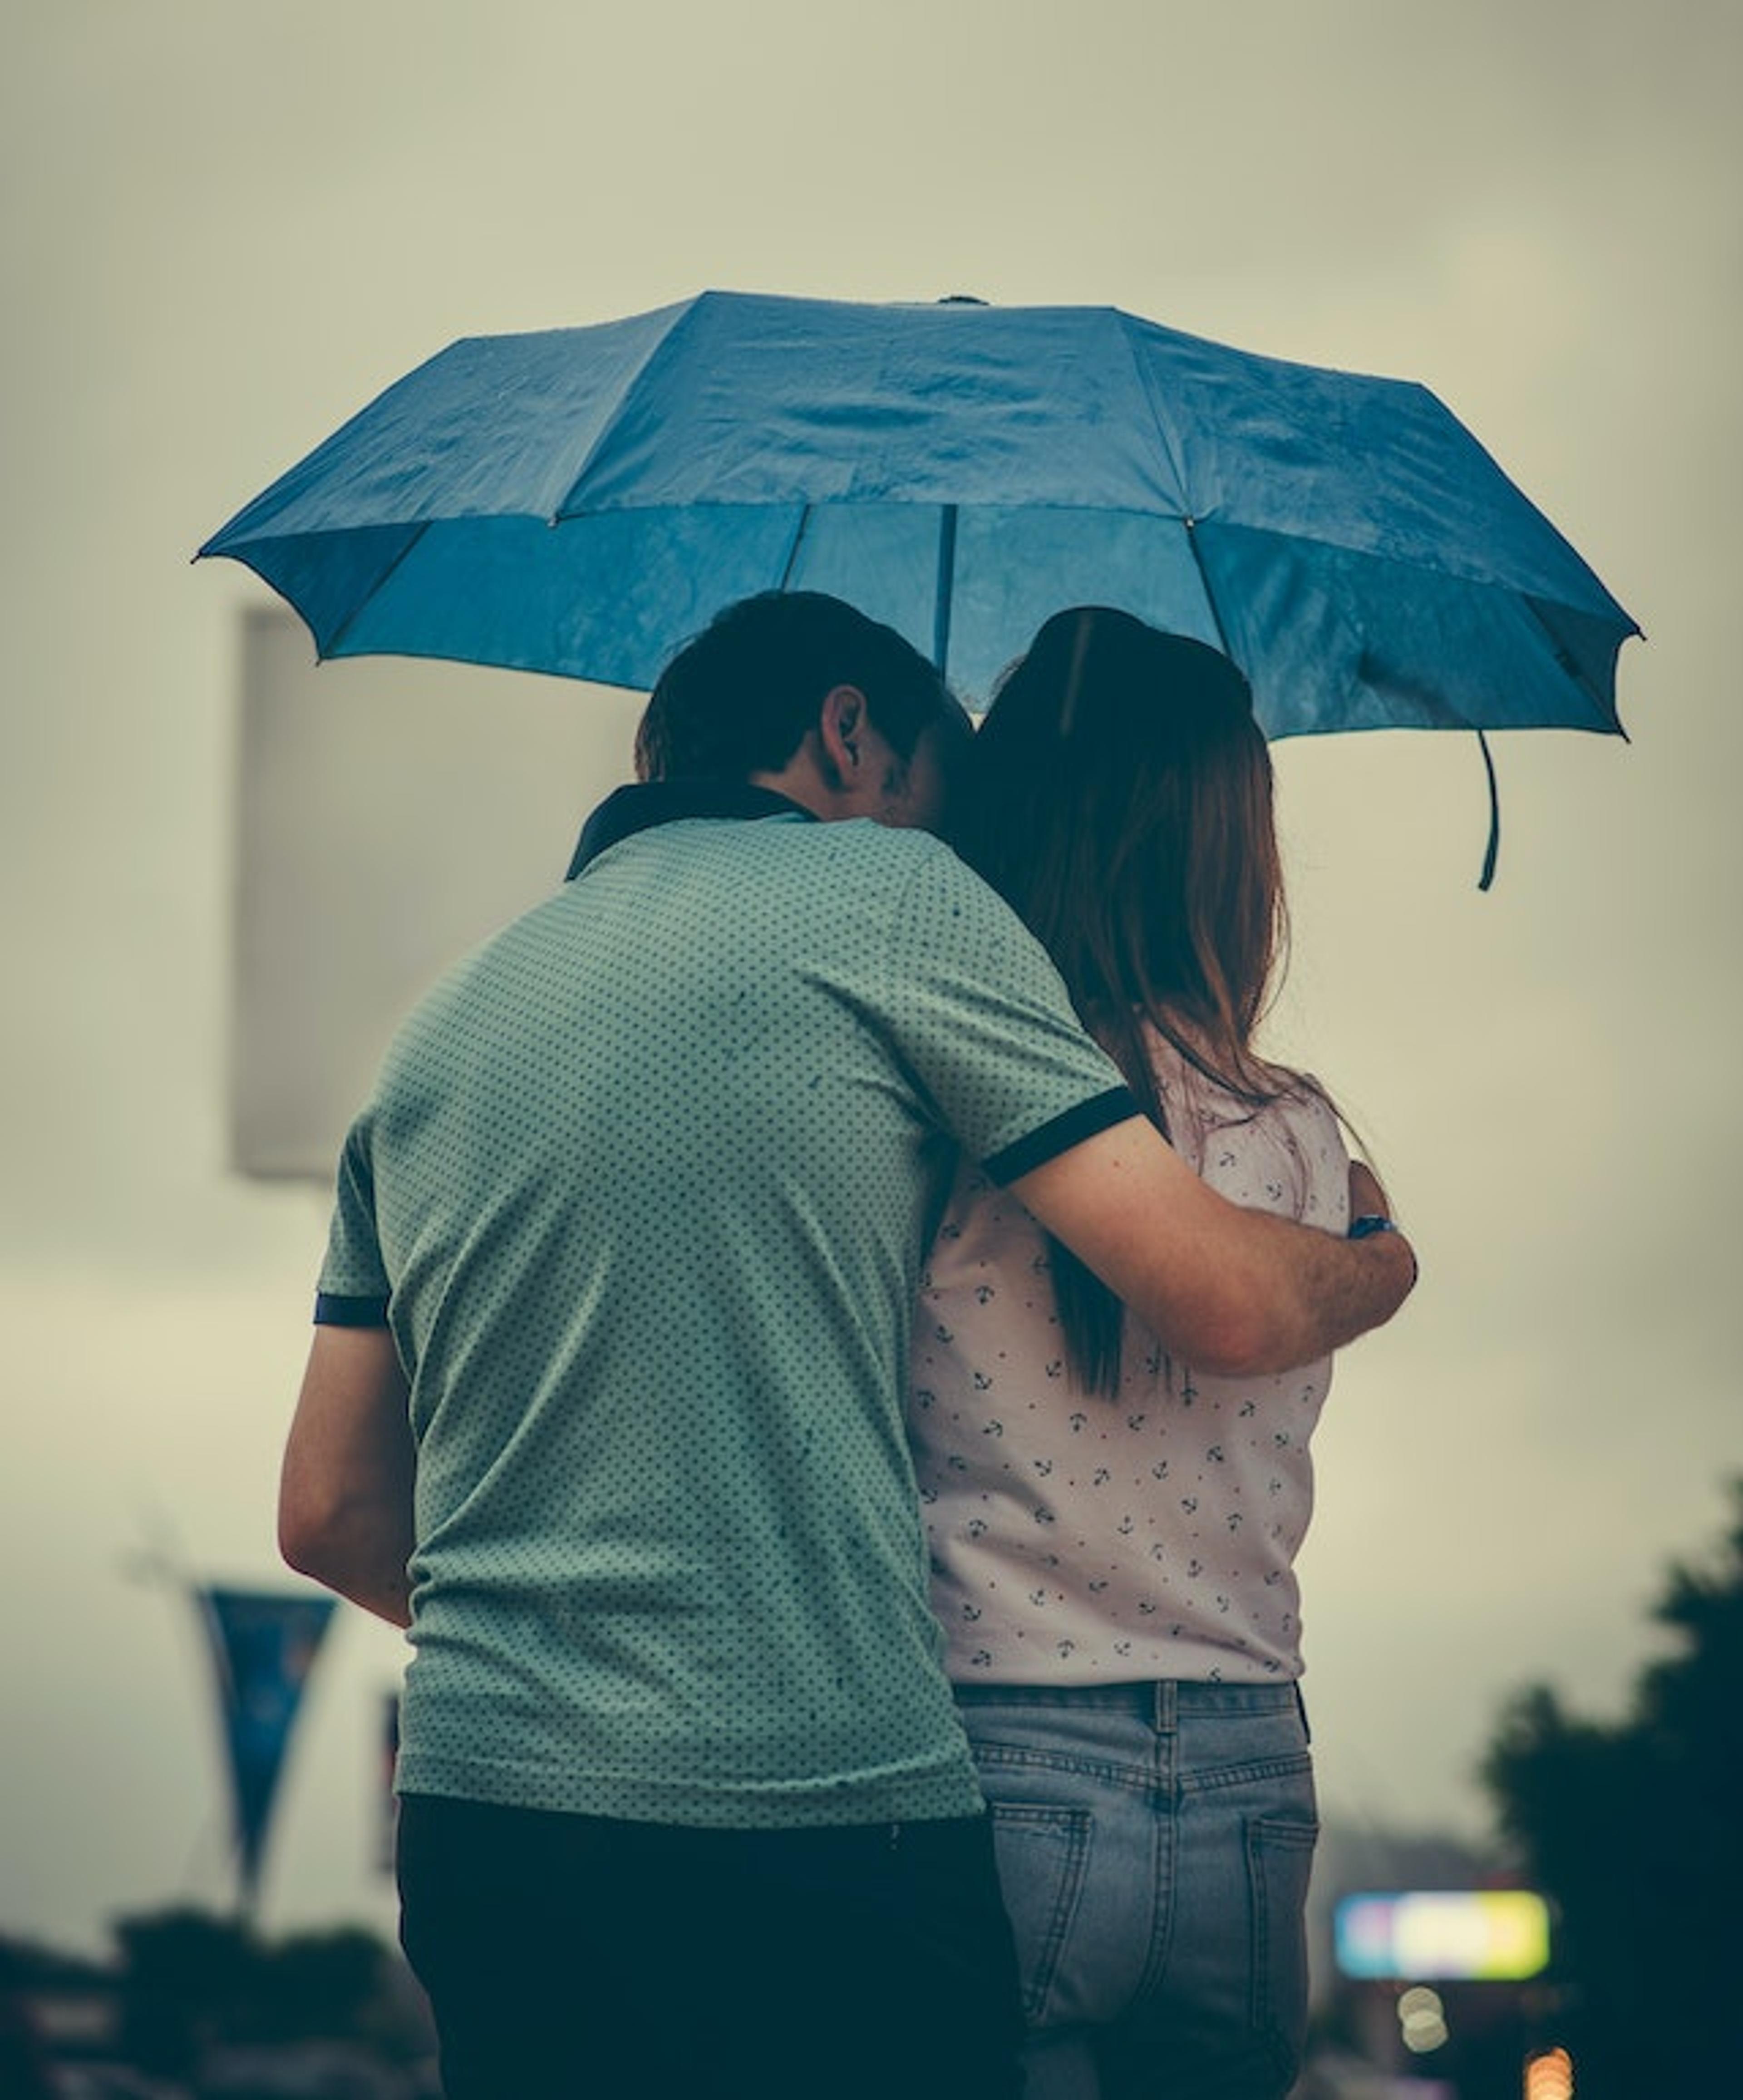 A couple standing under an umbrella, symbolising emotional sensitivities in relationship.